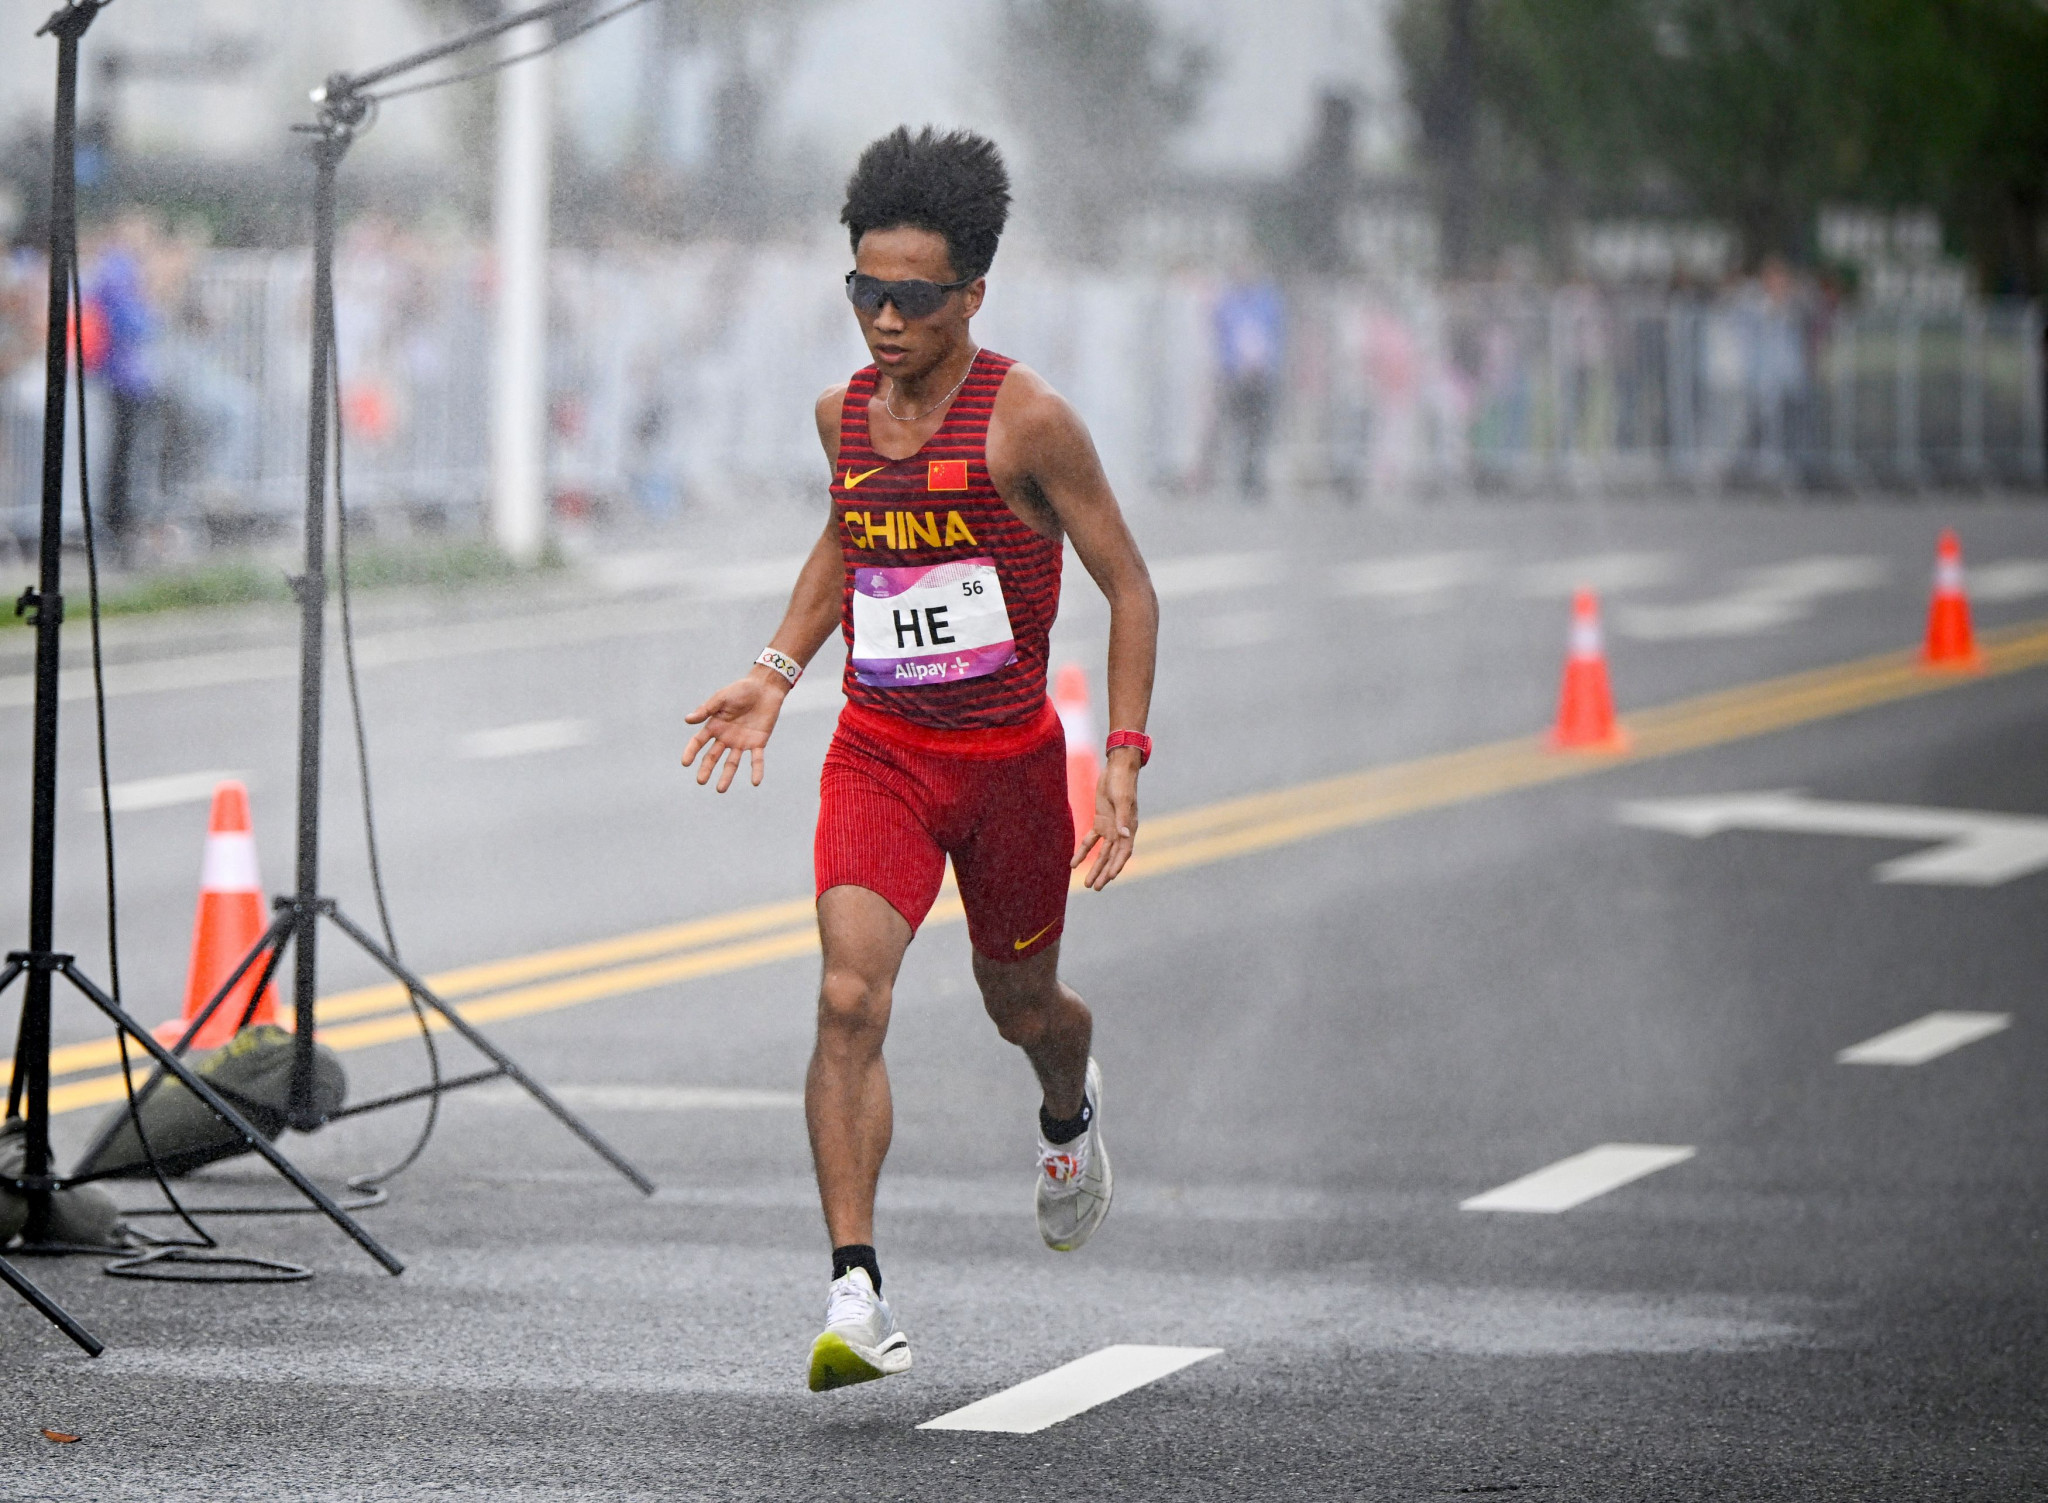 He Jie bursts across the line in first place to take the men's marathon gold medal in 2:13:01 ©Getty Images